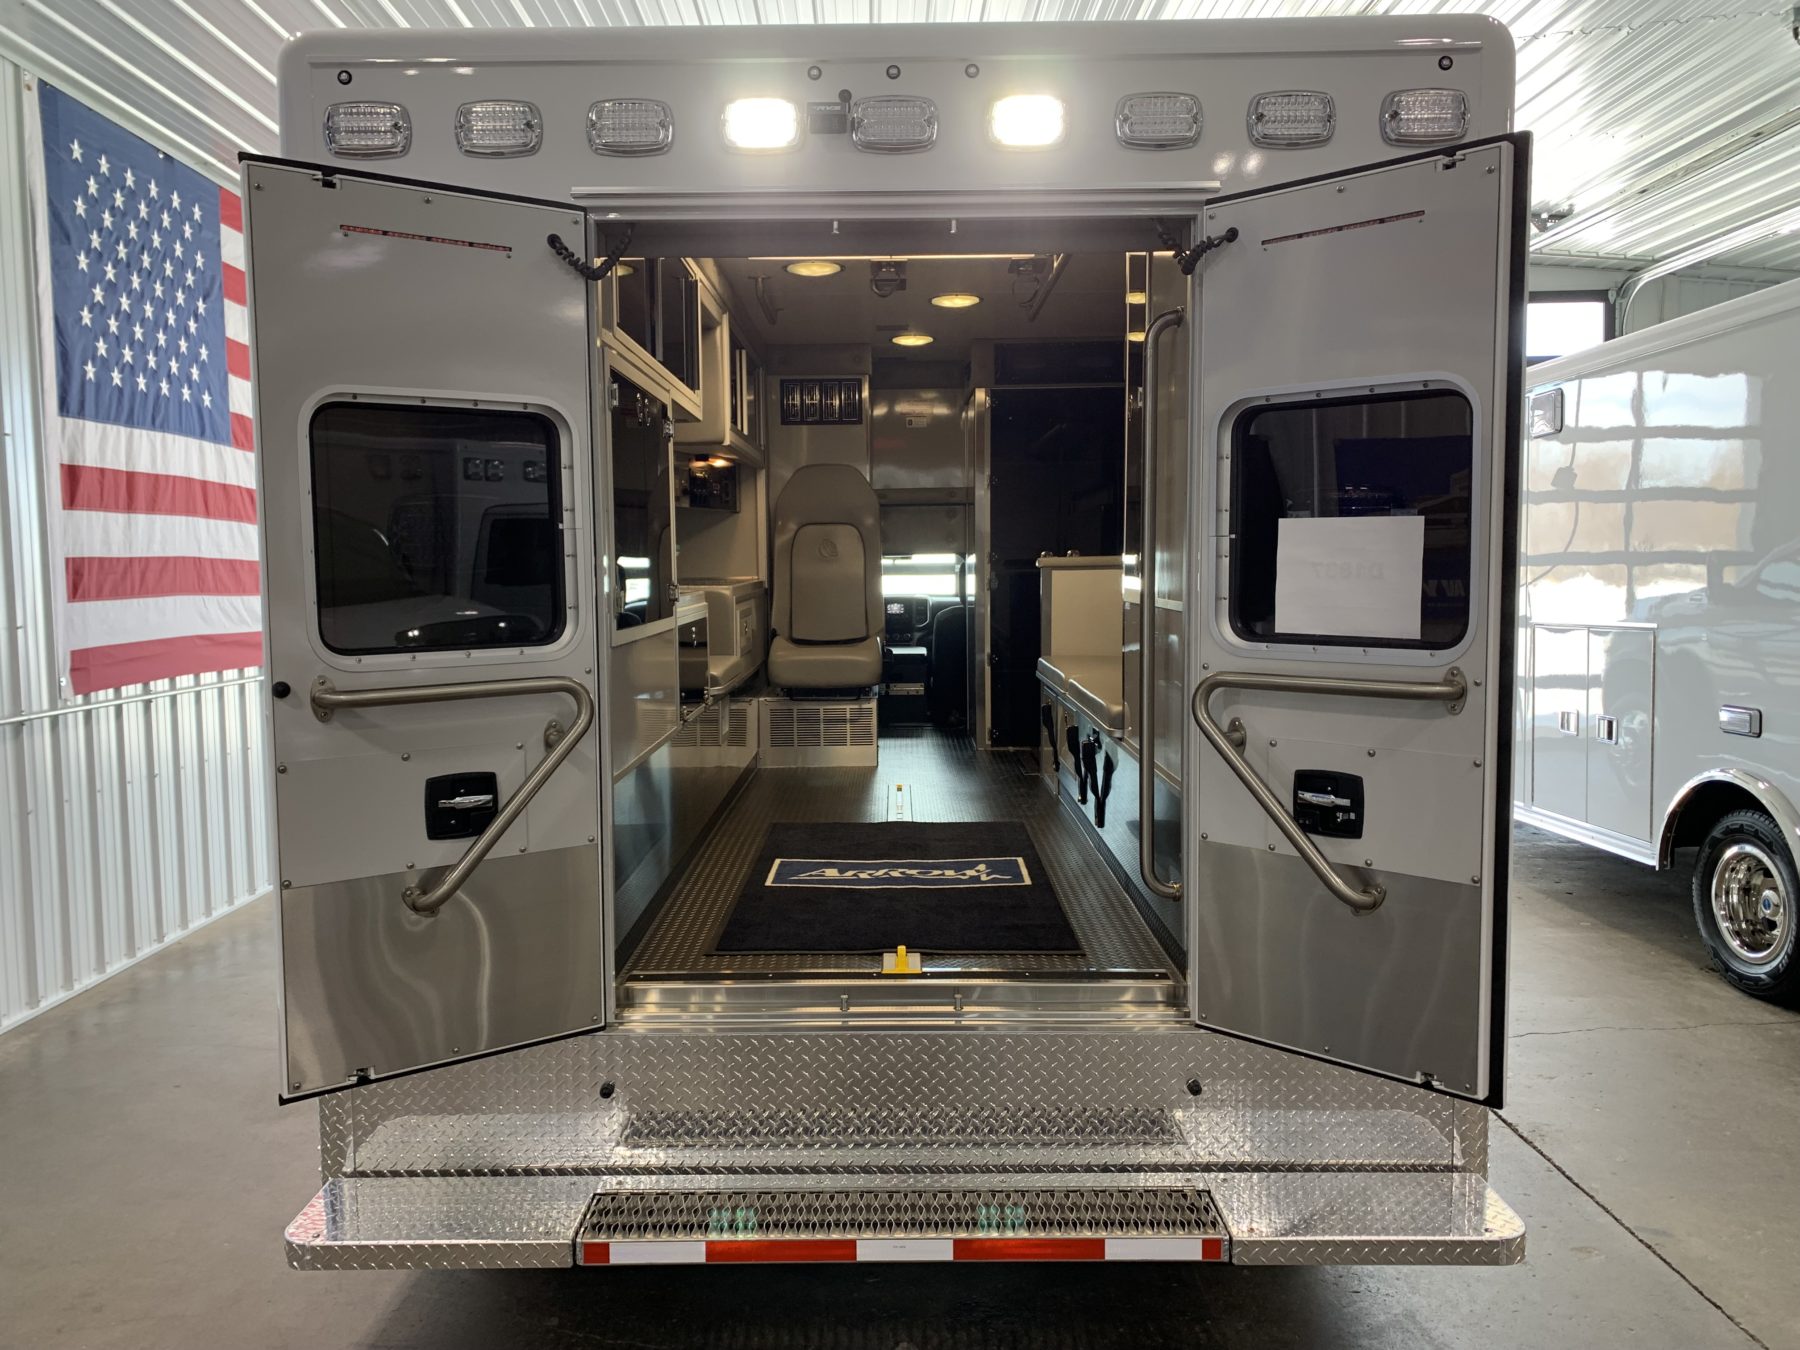 2022 Ram 5500 4x4 Heavy Duty Ambulance For Sale – Picture 9